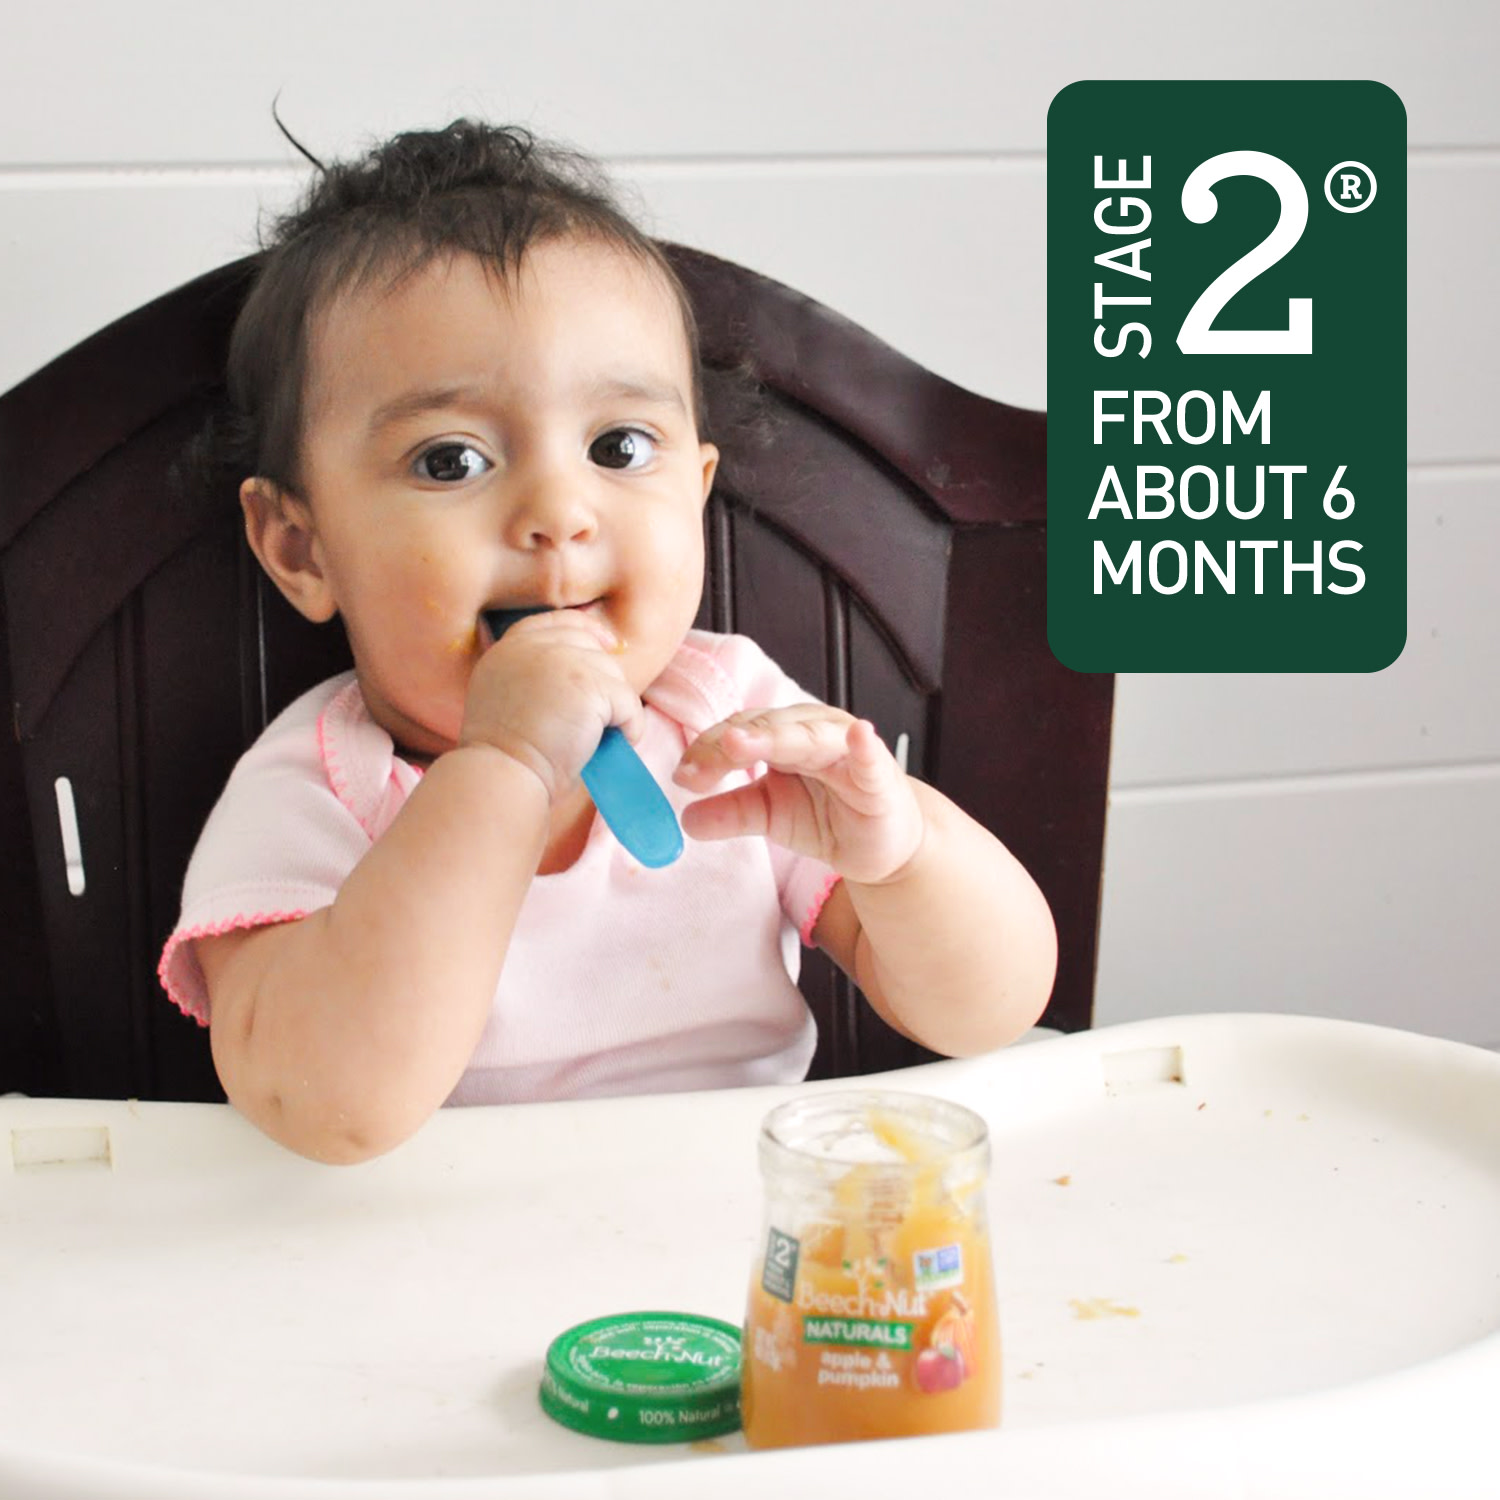 Beech-Nut Veggies Stage 2 Baby Food Variety Pack, 3.5 oz Pouch (9 Pack) - image 3 of 3